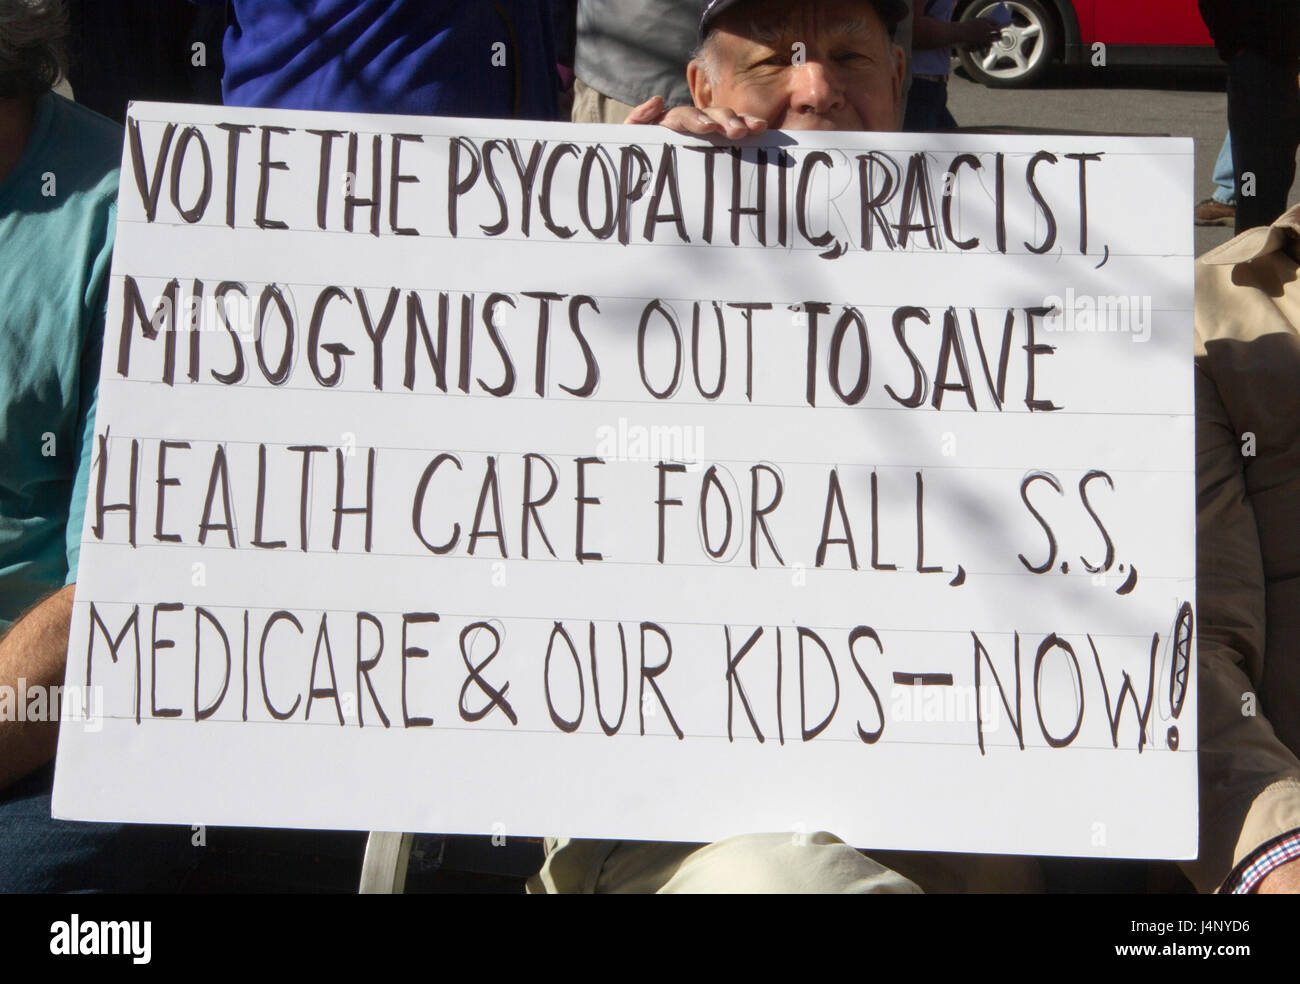 Asheville, North Carolina, USA - February 25, 2017: Older white man holds a sign saying 'Vote the Psychopathic, Racist, Misogynists Out to Save Health Stock Photo